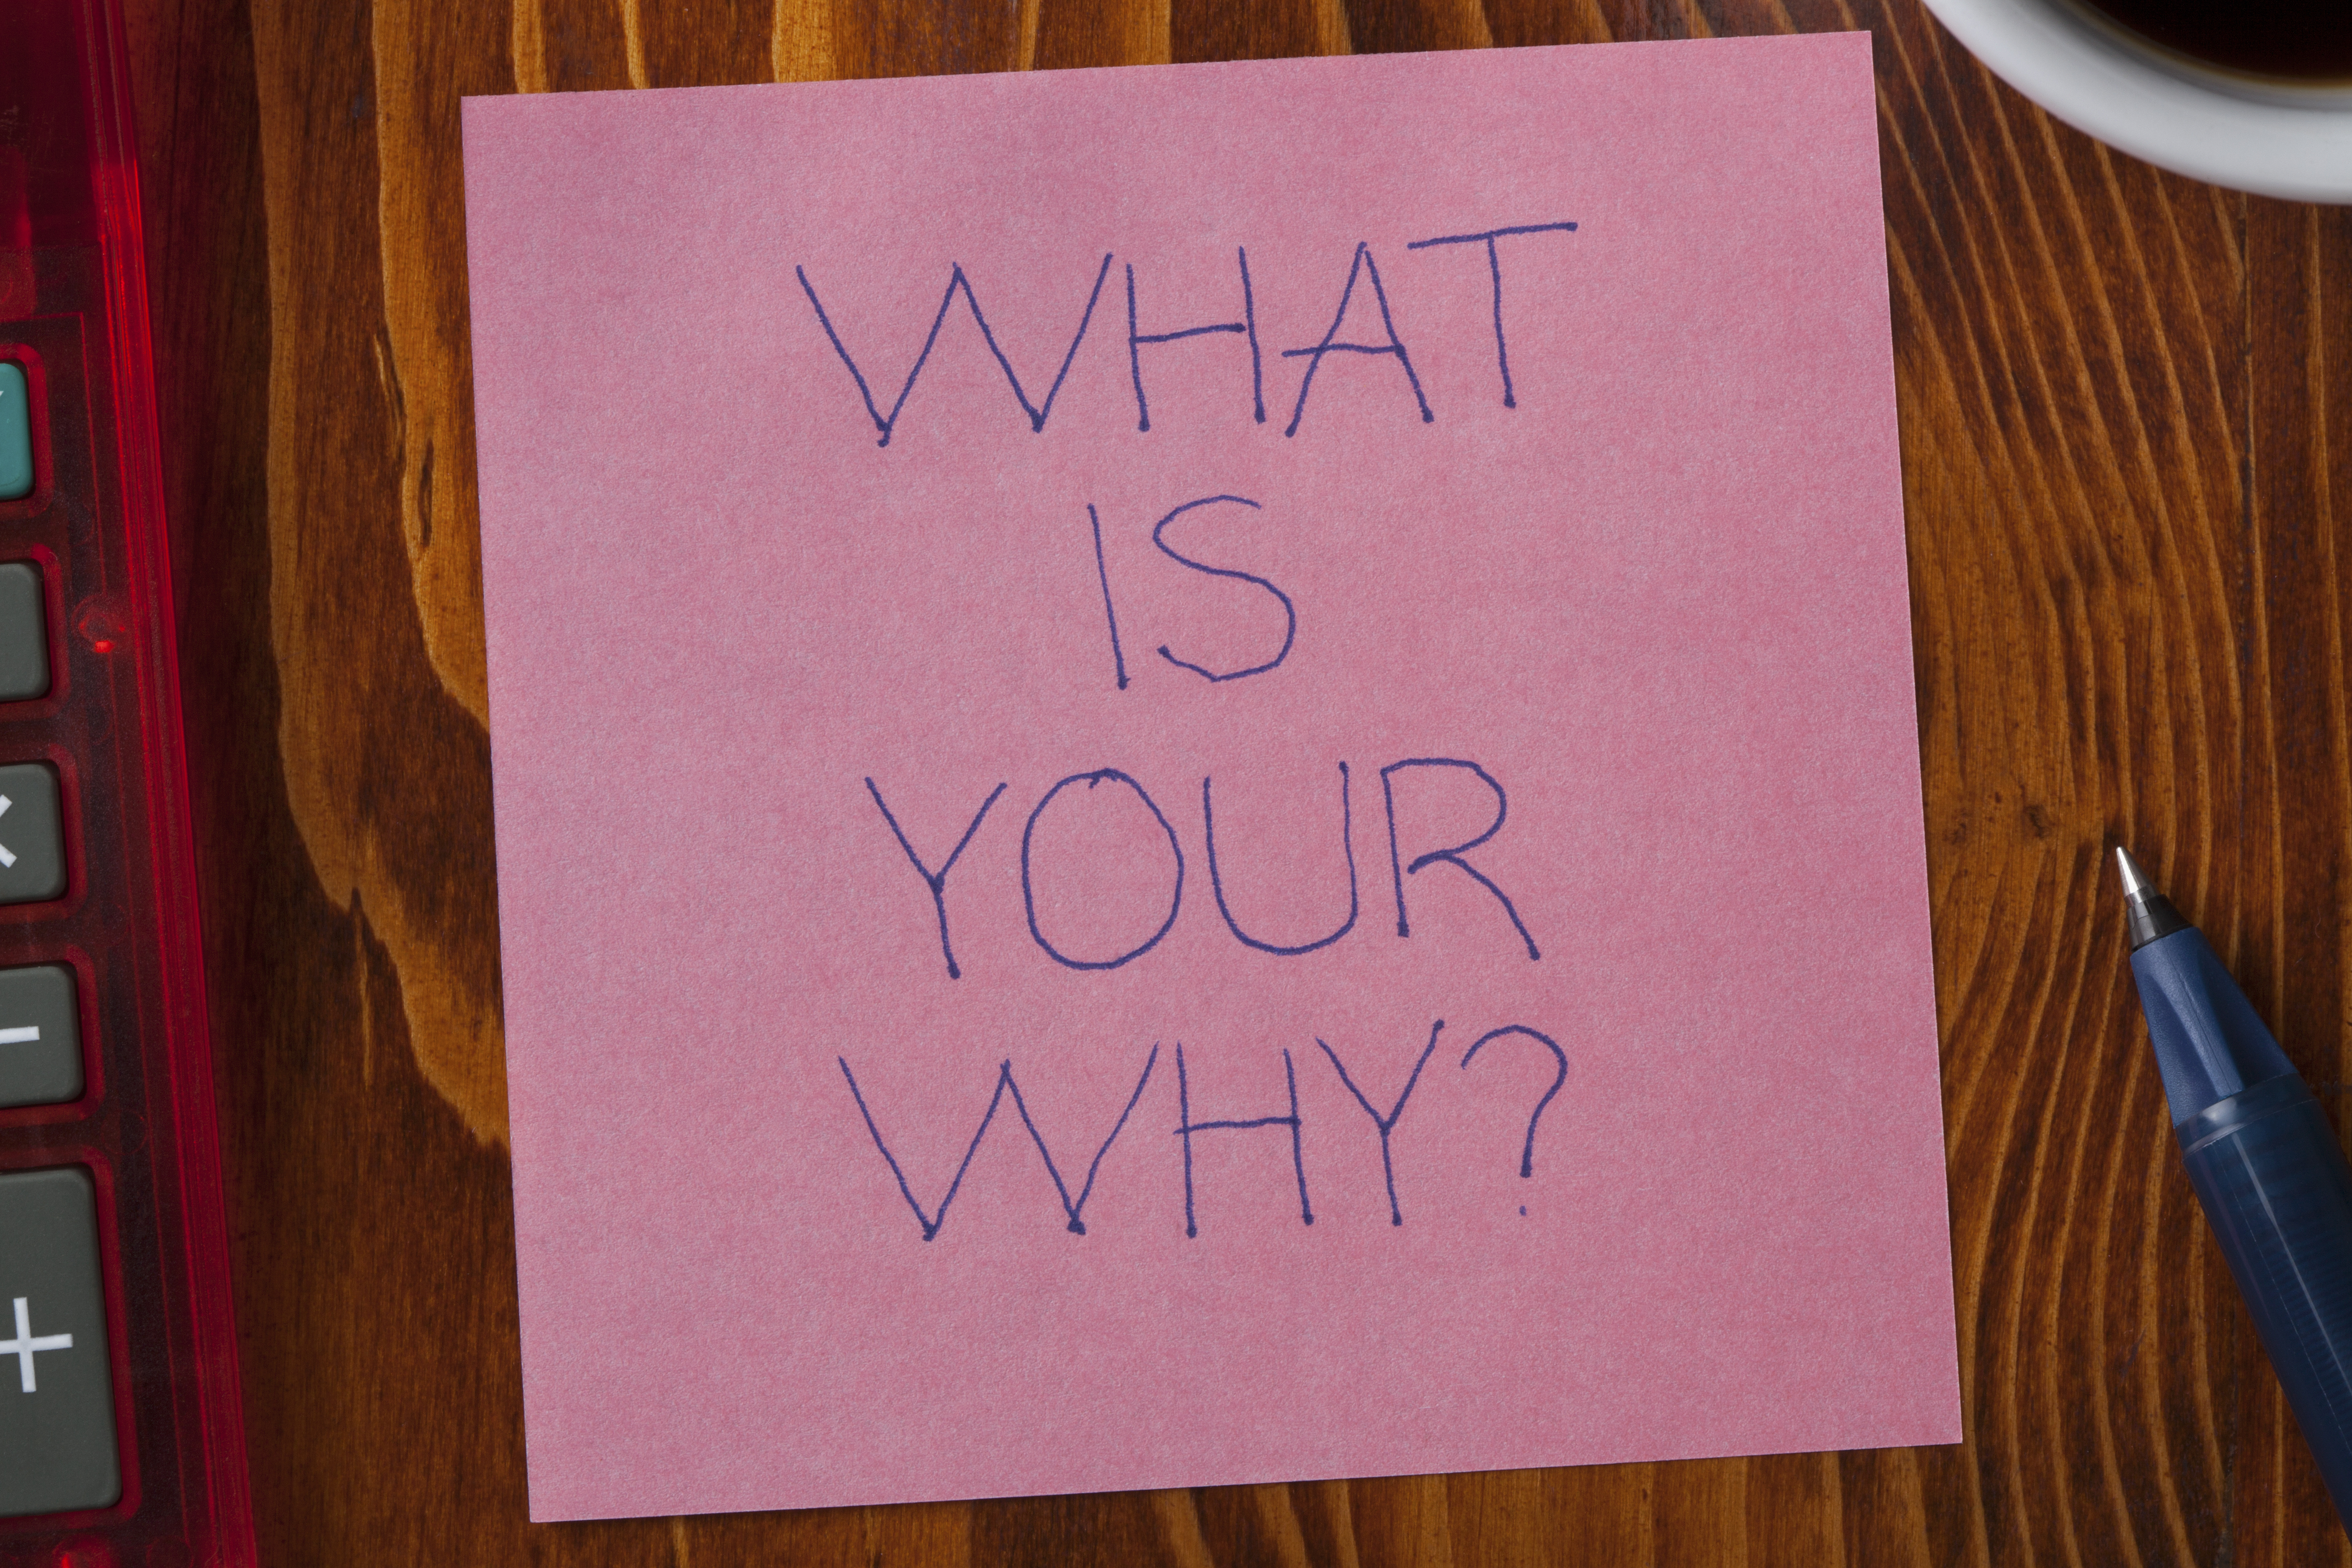 What is your why written on a note on wooden background with pen.